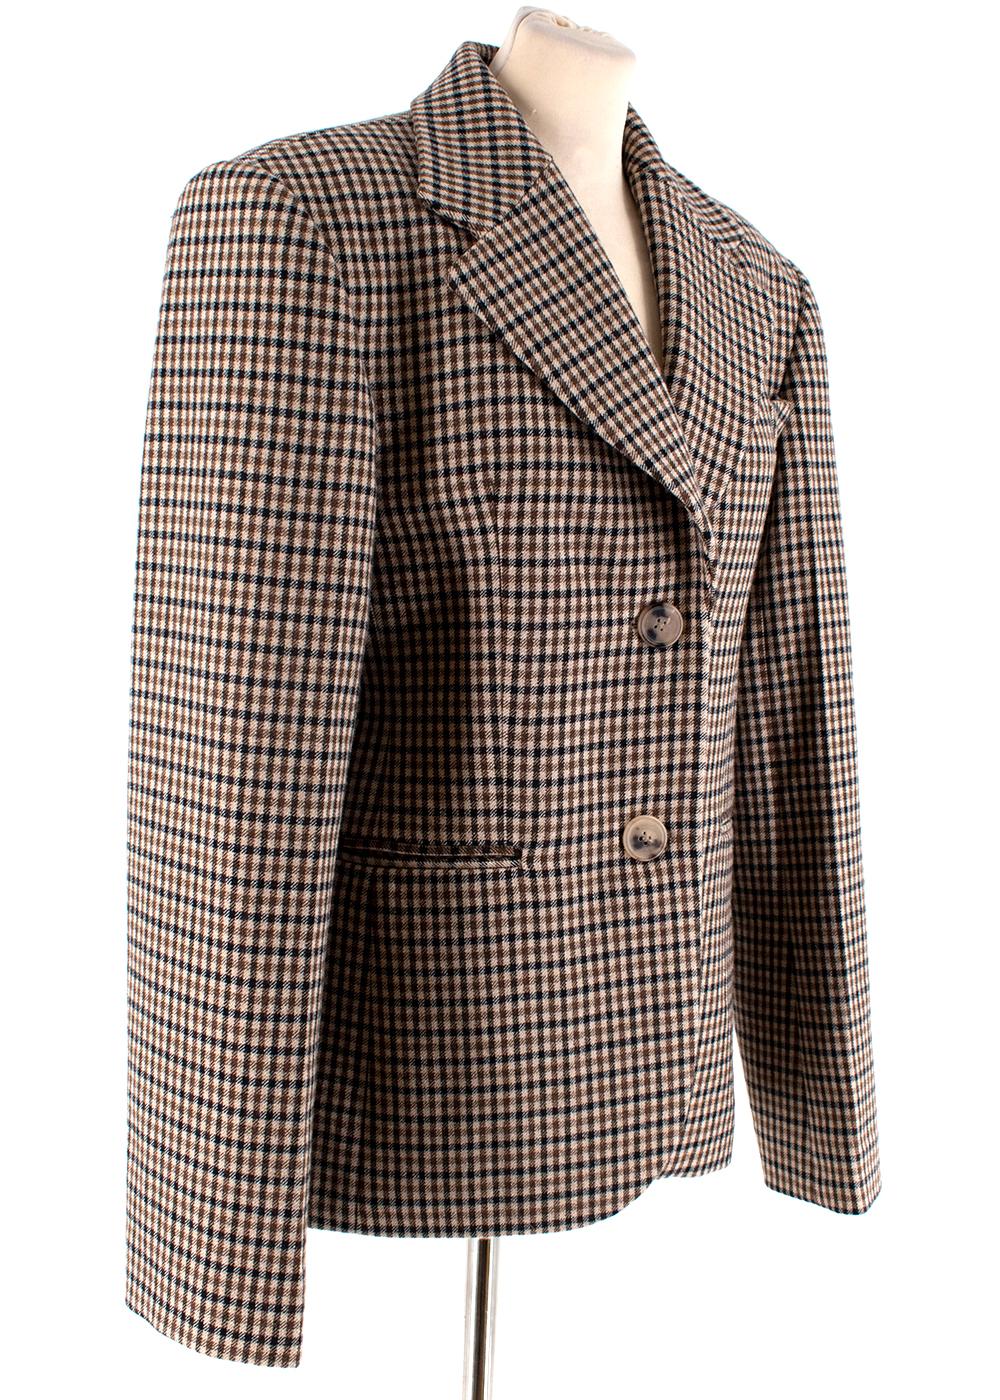 Khaite Oversized checked wool-blend blazer

- Presented in Khaite's Pre-AW19 lookbook
- This checked brown blazer showcases the New York label's impeccable tailoring
- It's cut to an oversized fit that's padded at the shoulders and streamlined